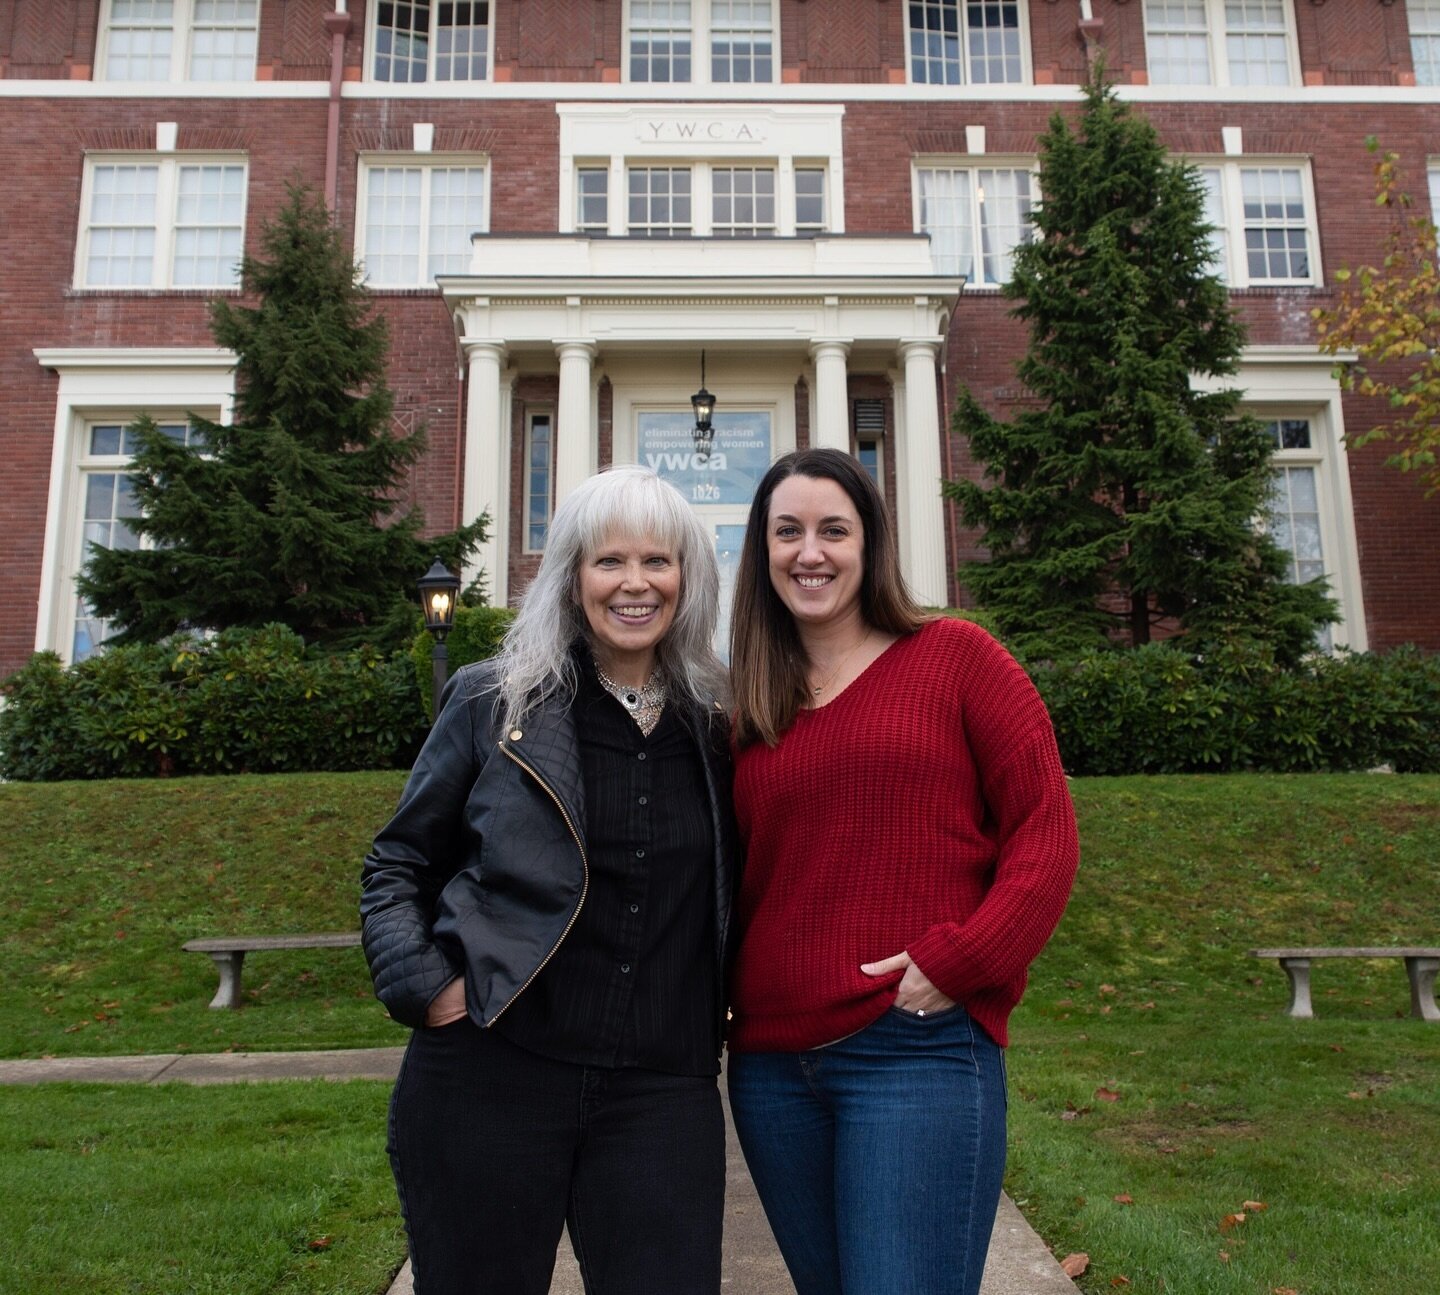 A heartfelt thank you to @cascadiadaily for capturing this special moment and writing an article featuring YWCA Bellingham! 🌟 Featured here are Theresa Hohman, our dedicated Housing Director, and Alle Schene, our newly appointed CEO, standing proudl